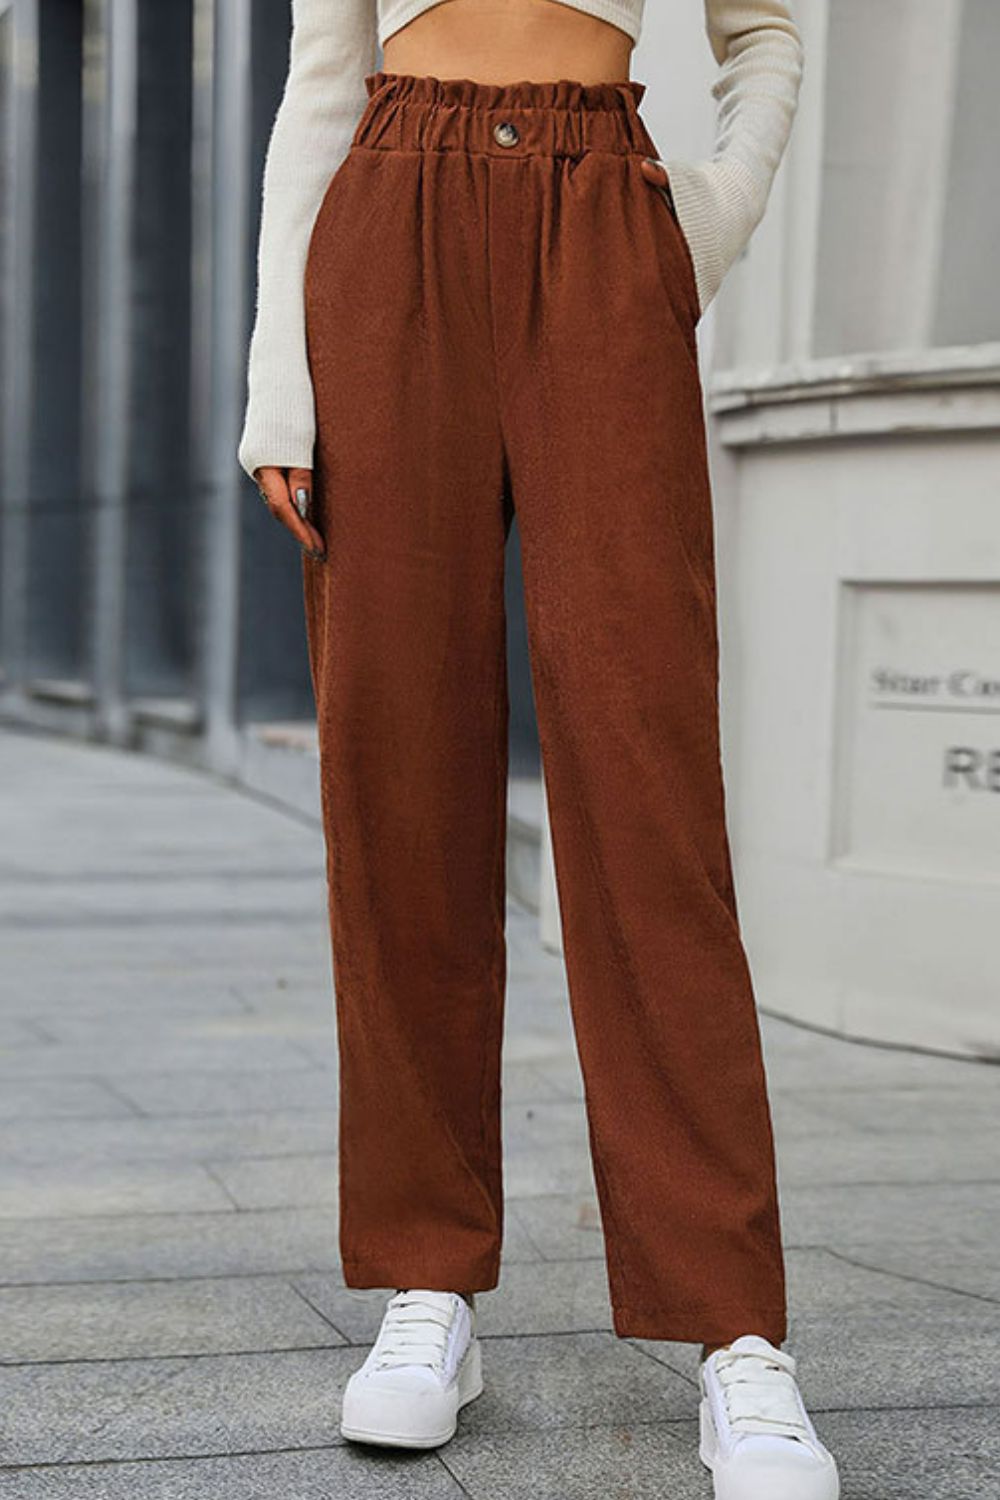 Paperbag Waist Straight Leg Pants with Pockets - Classy Fashion Chic